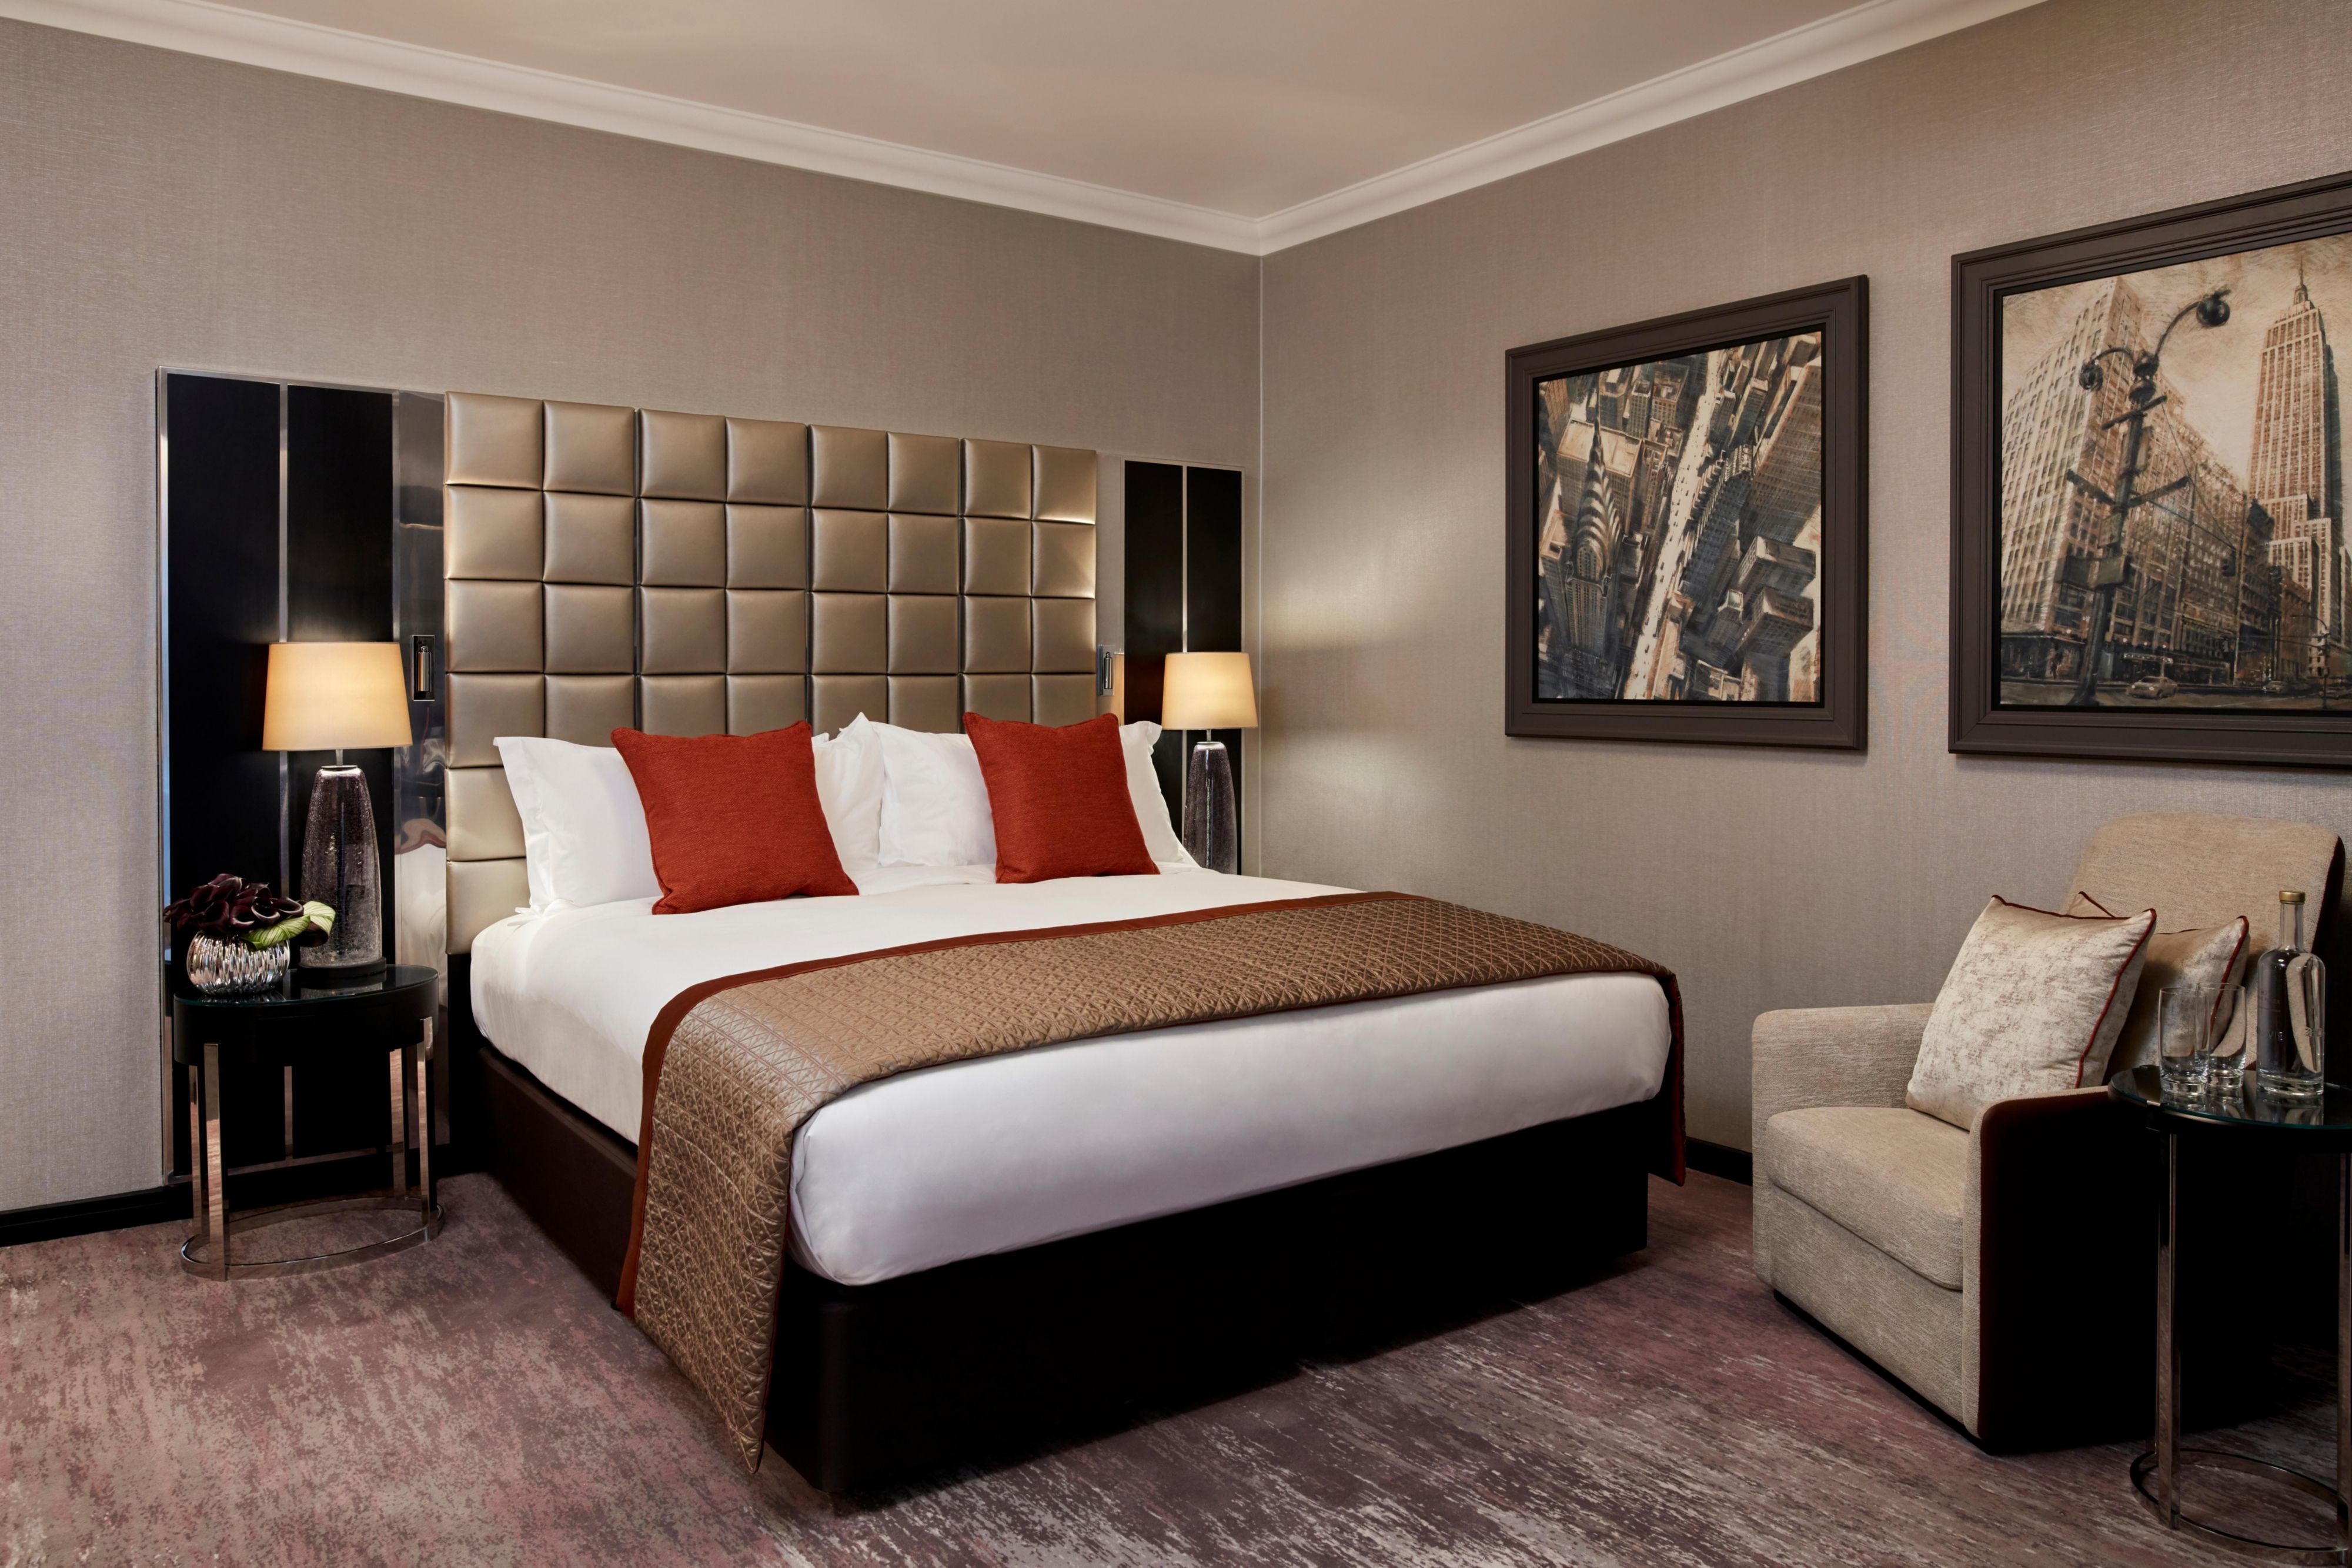 Junior suites offer a more spacious option and large kingsize bed